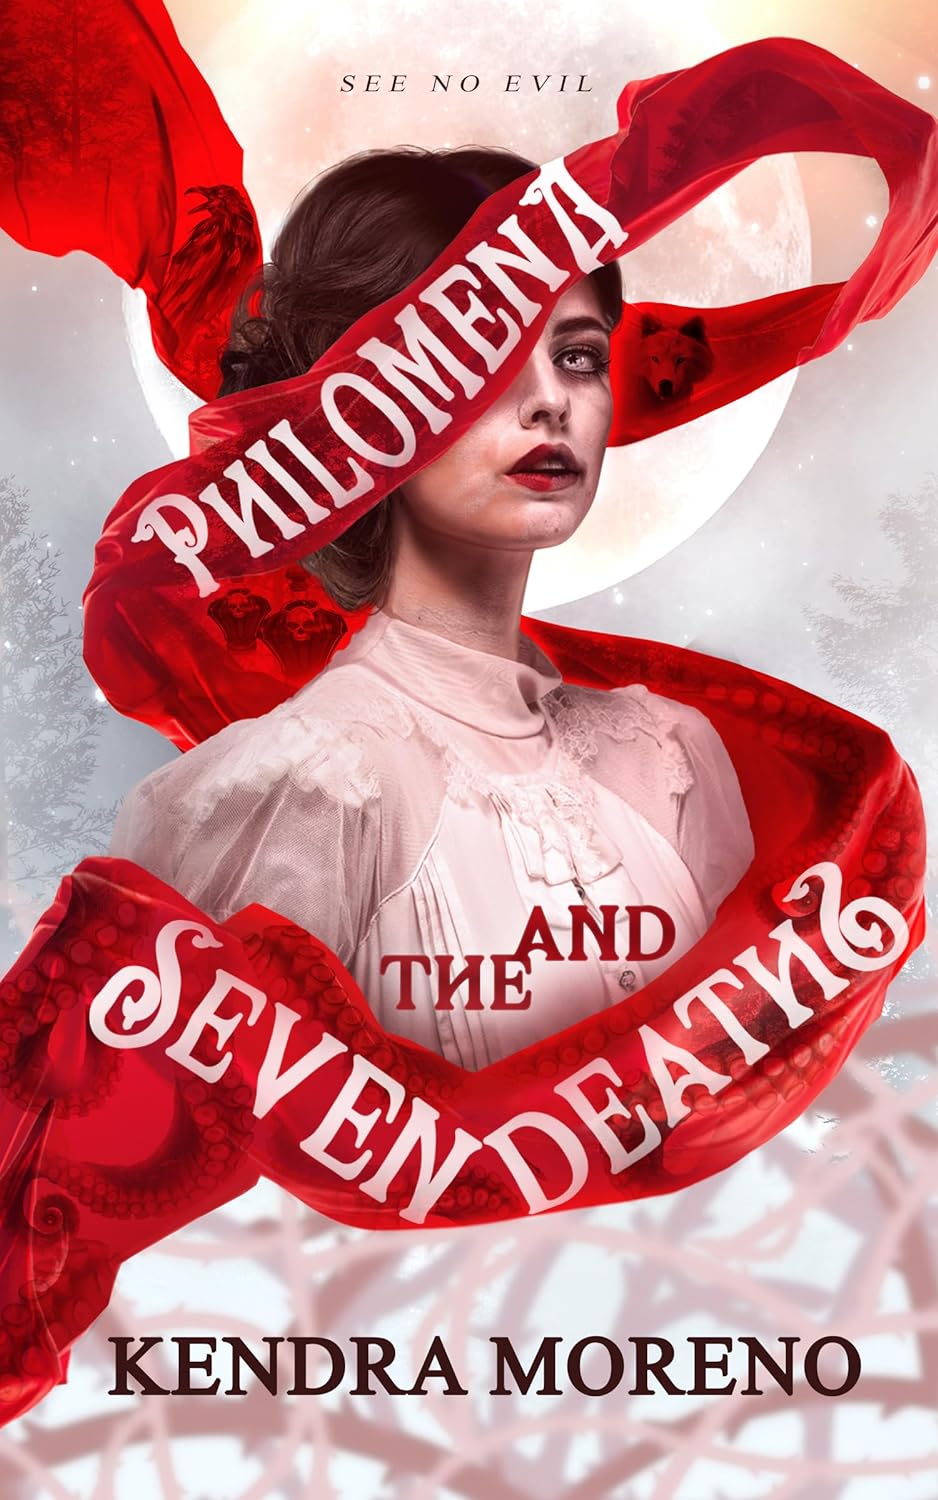 Philomena and the Seven Deaths by Kendra Moreno